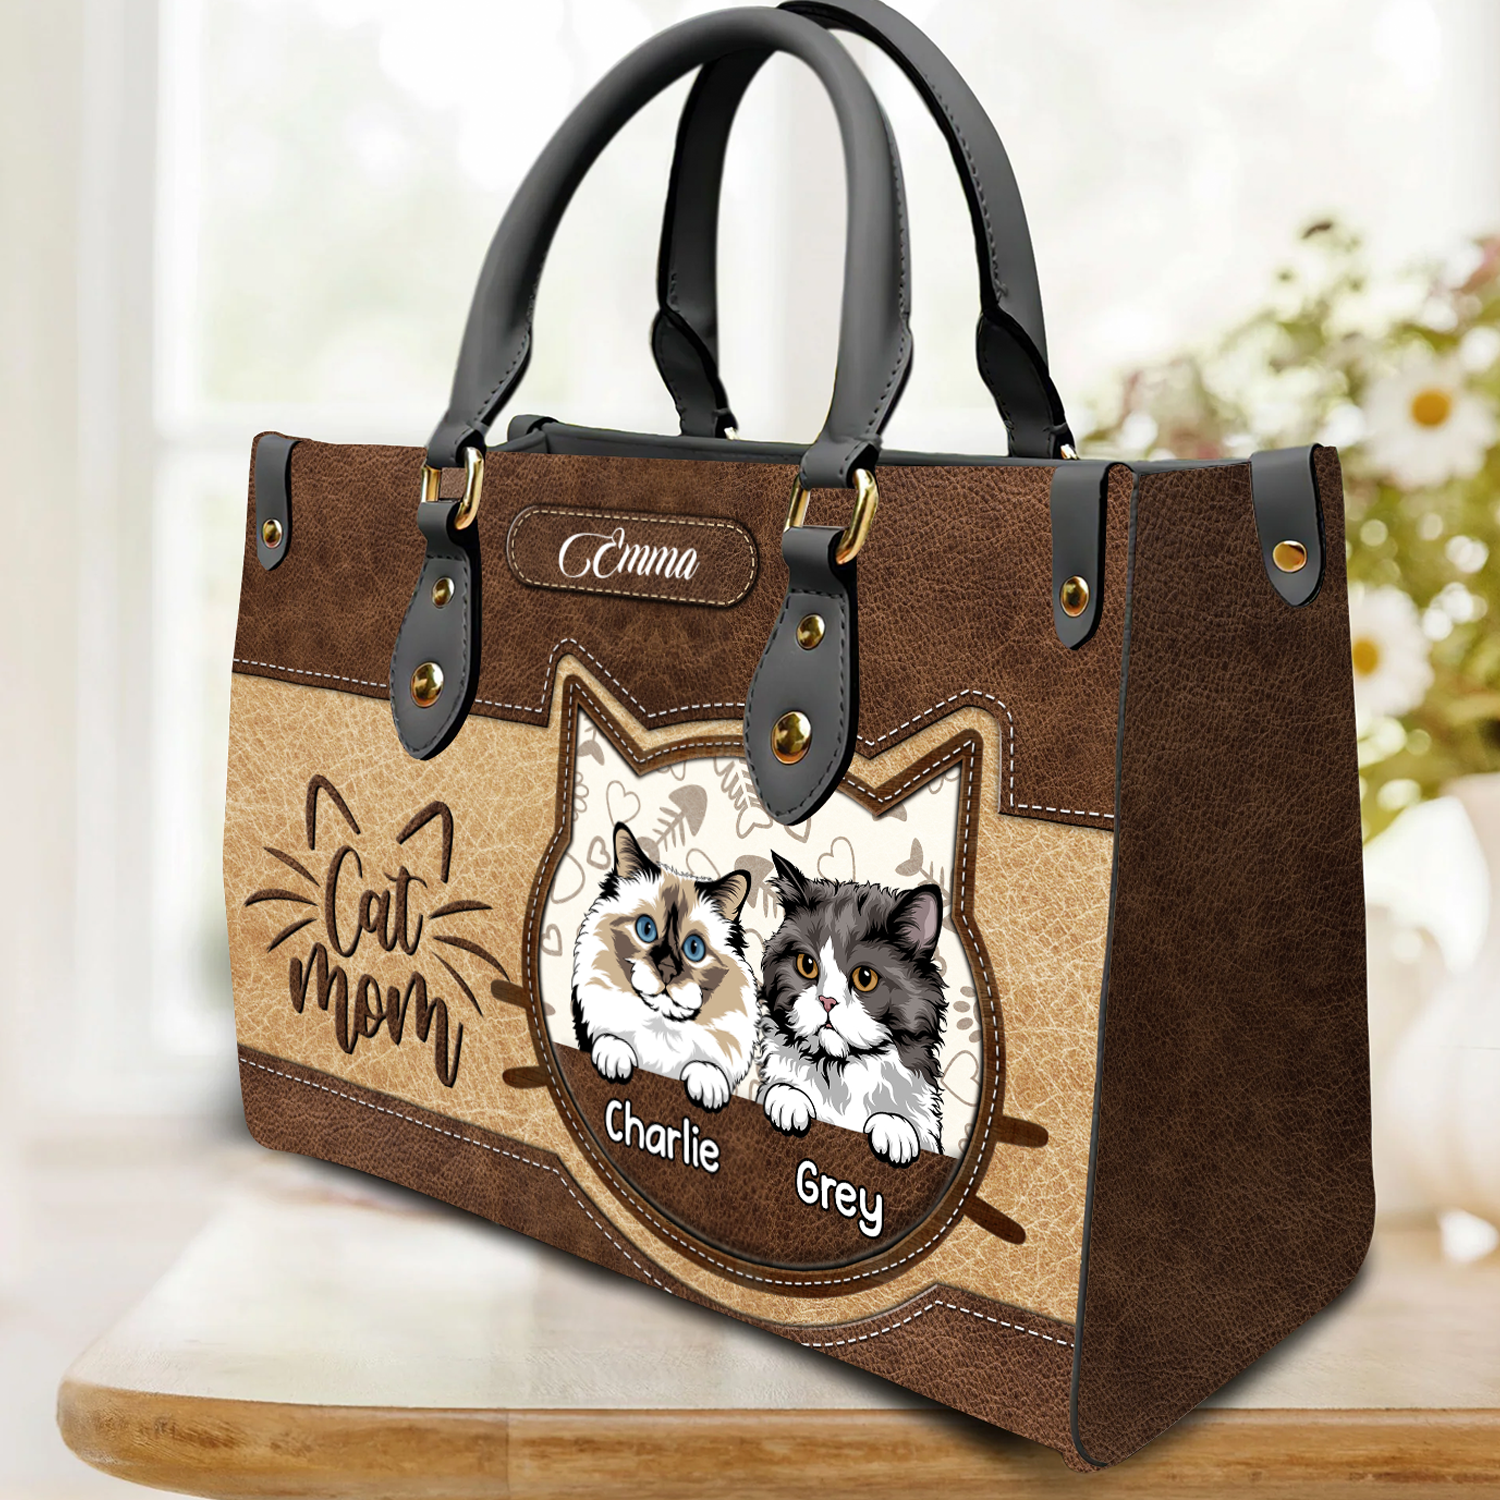 Cute Cat Kitten Pet Personalized Leather Handbag Purrfect Gift for Cat Mom HTN02FEB24KL2